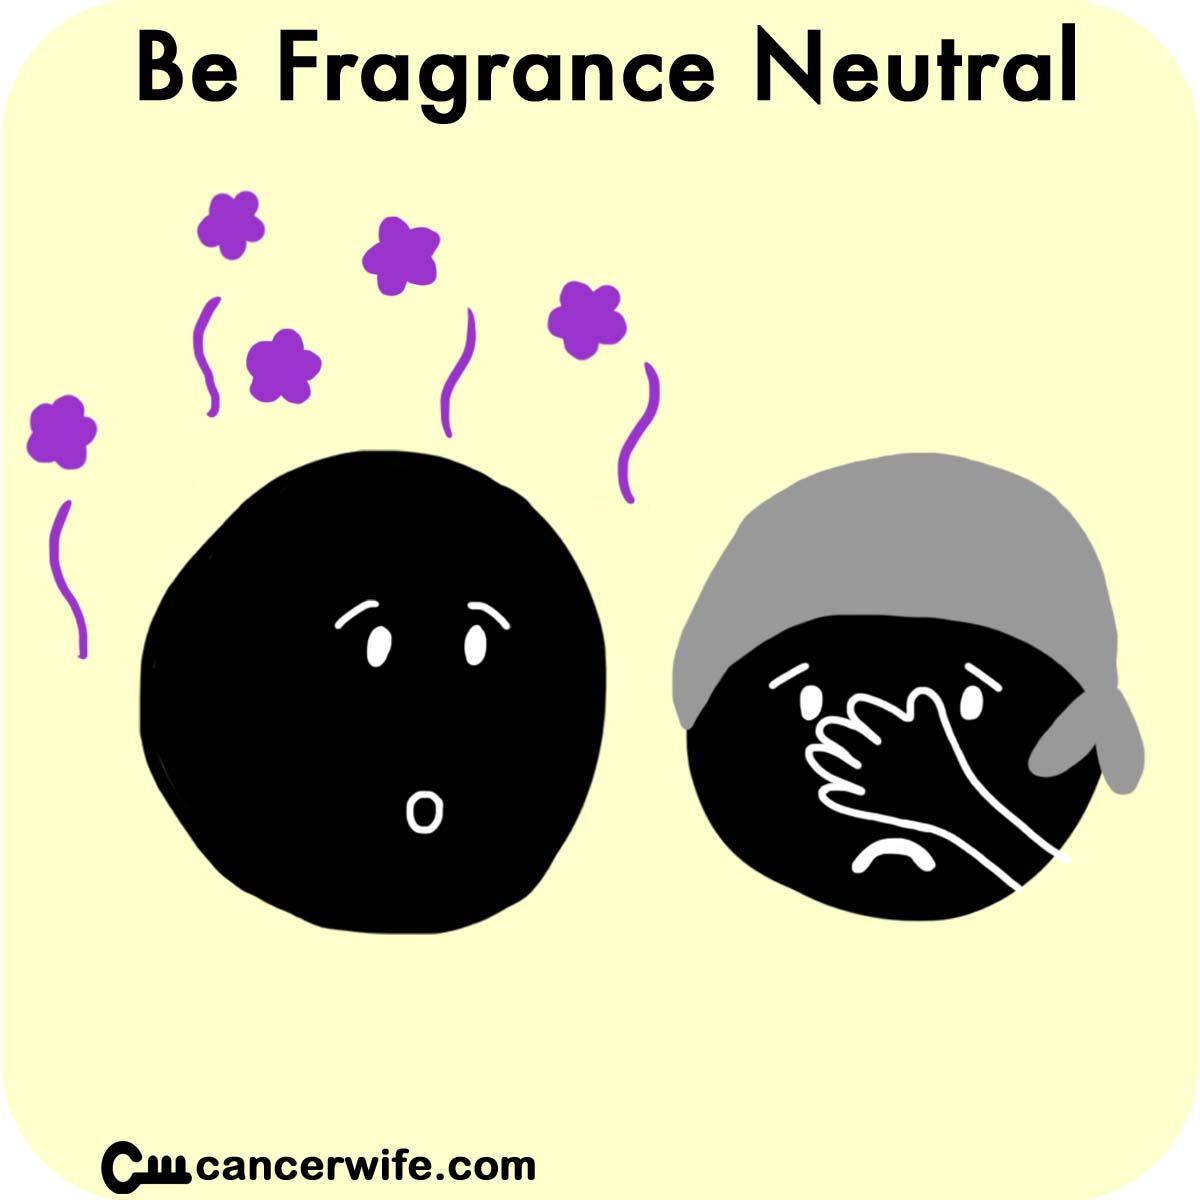 Tips for Visiting Cancer Paients, Be fragrance neutral